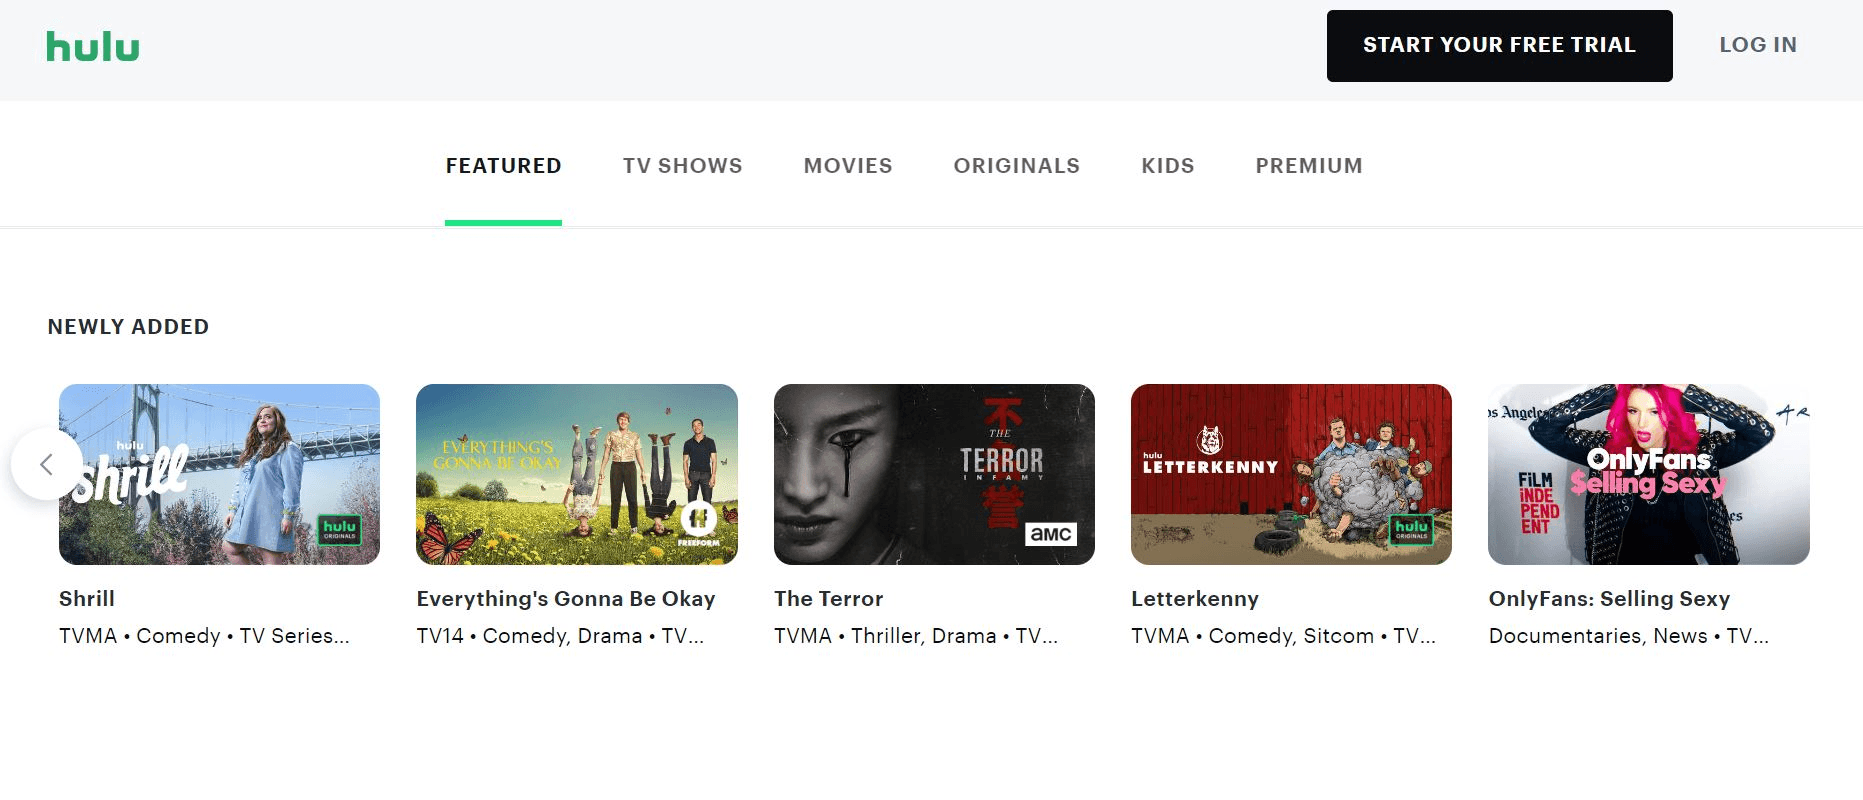 Hulu streaming service content. Subscribe to a Hulu Premium account or try and get a free Hulu Premium account. 